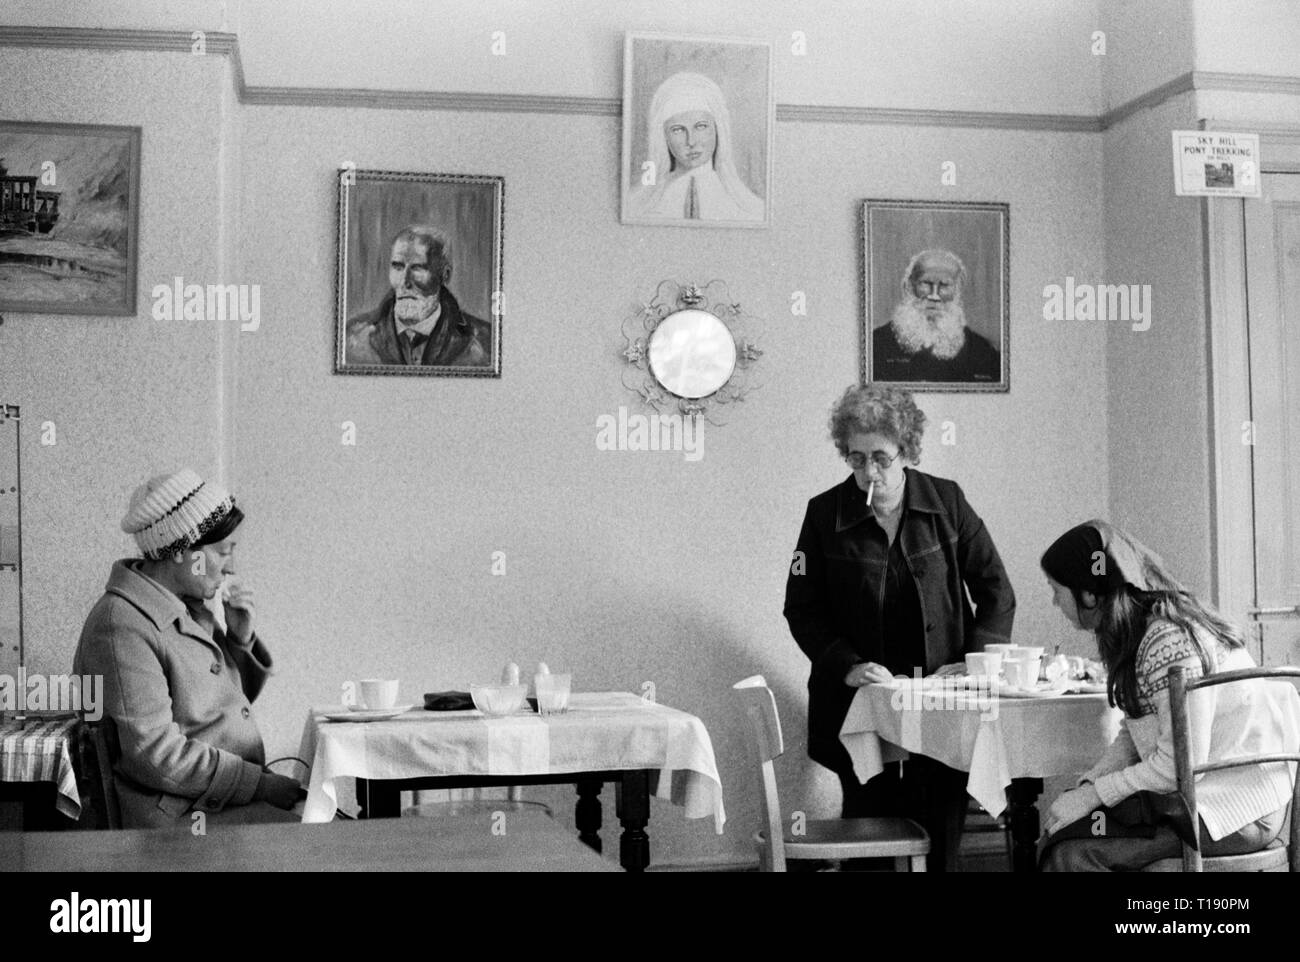 Douglas, Isle of Man 1970s. Manx cafe interior group of women smoking inside.  1978 Local artist paintings on the wall. HOMER SYKES Stock Photo